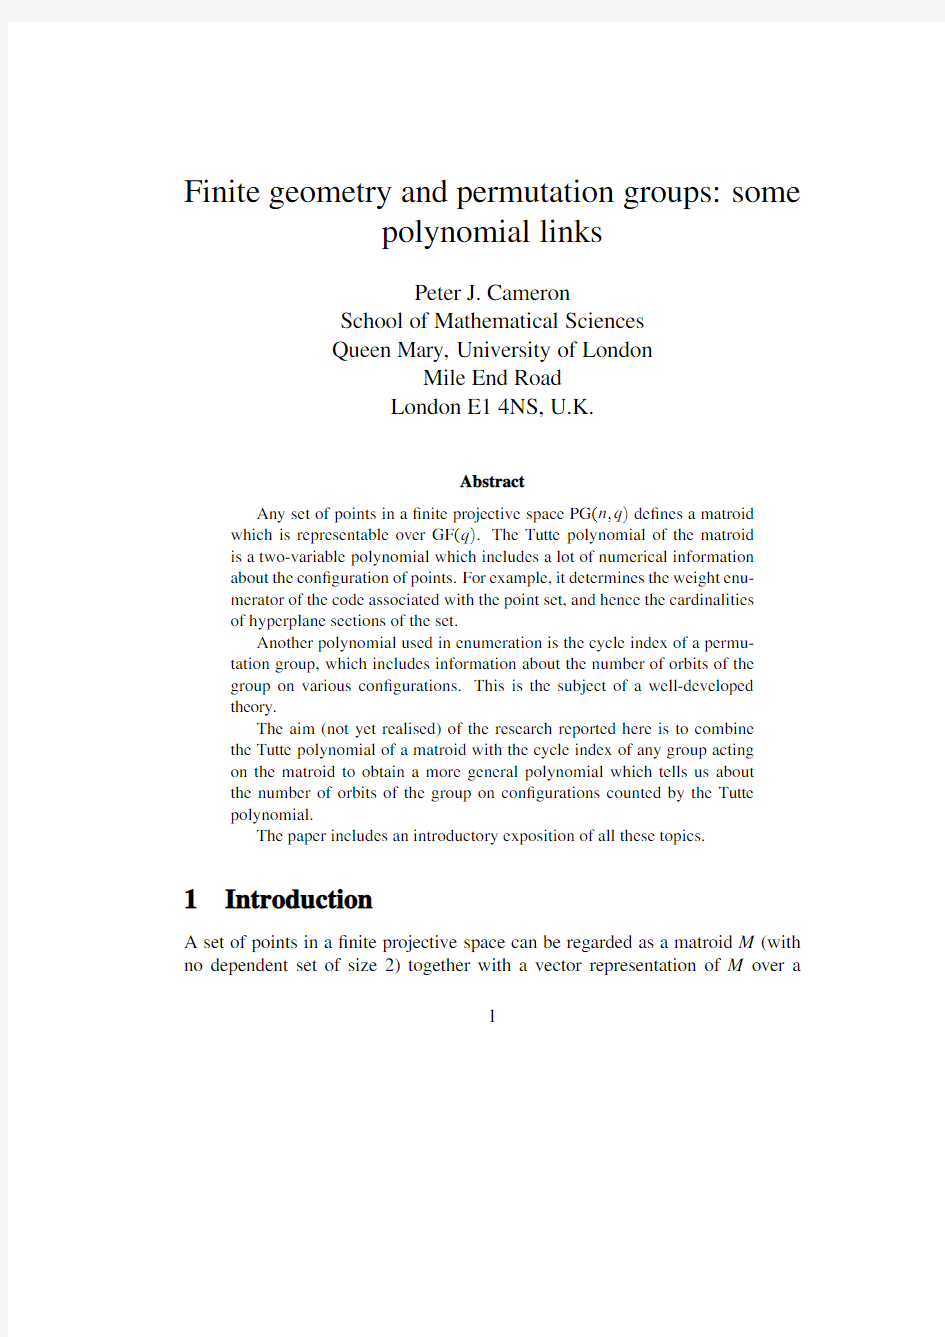 Finite geometry and permutation groups some polynomial links